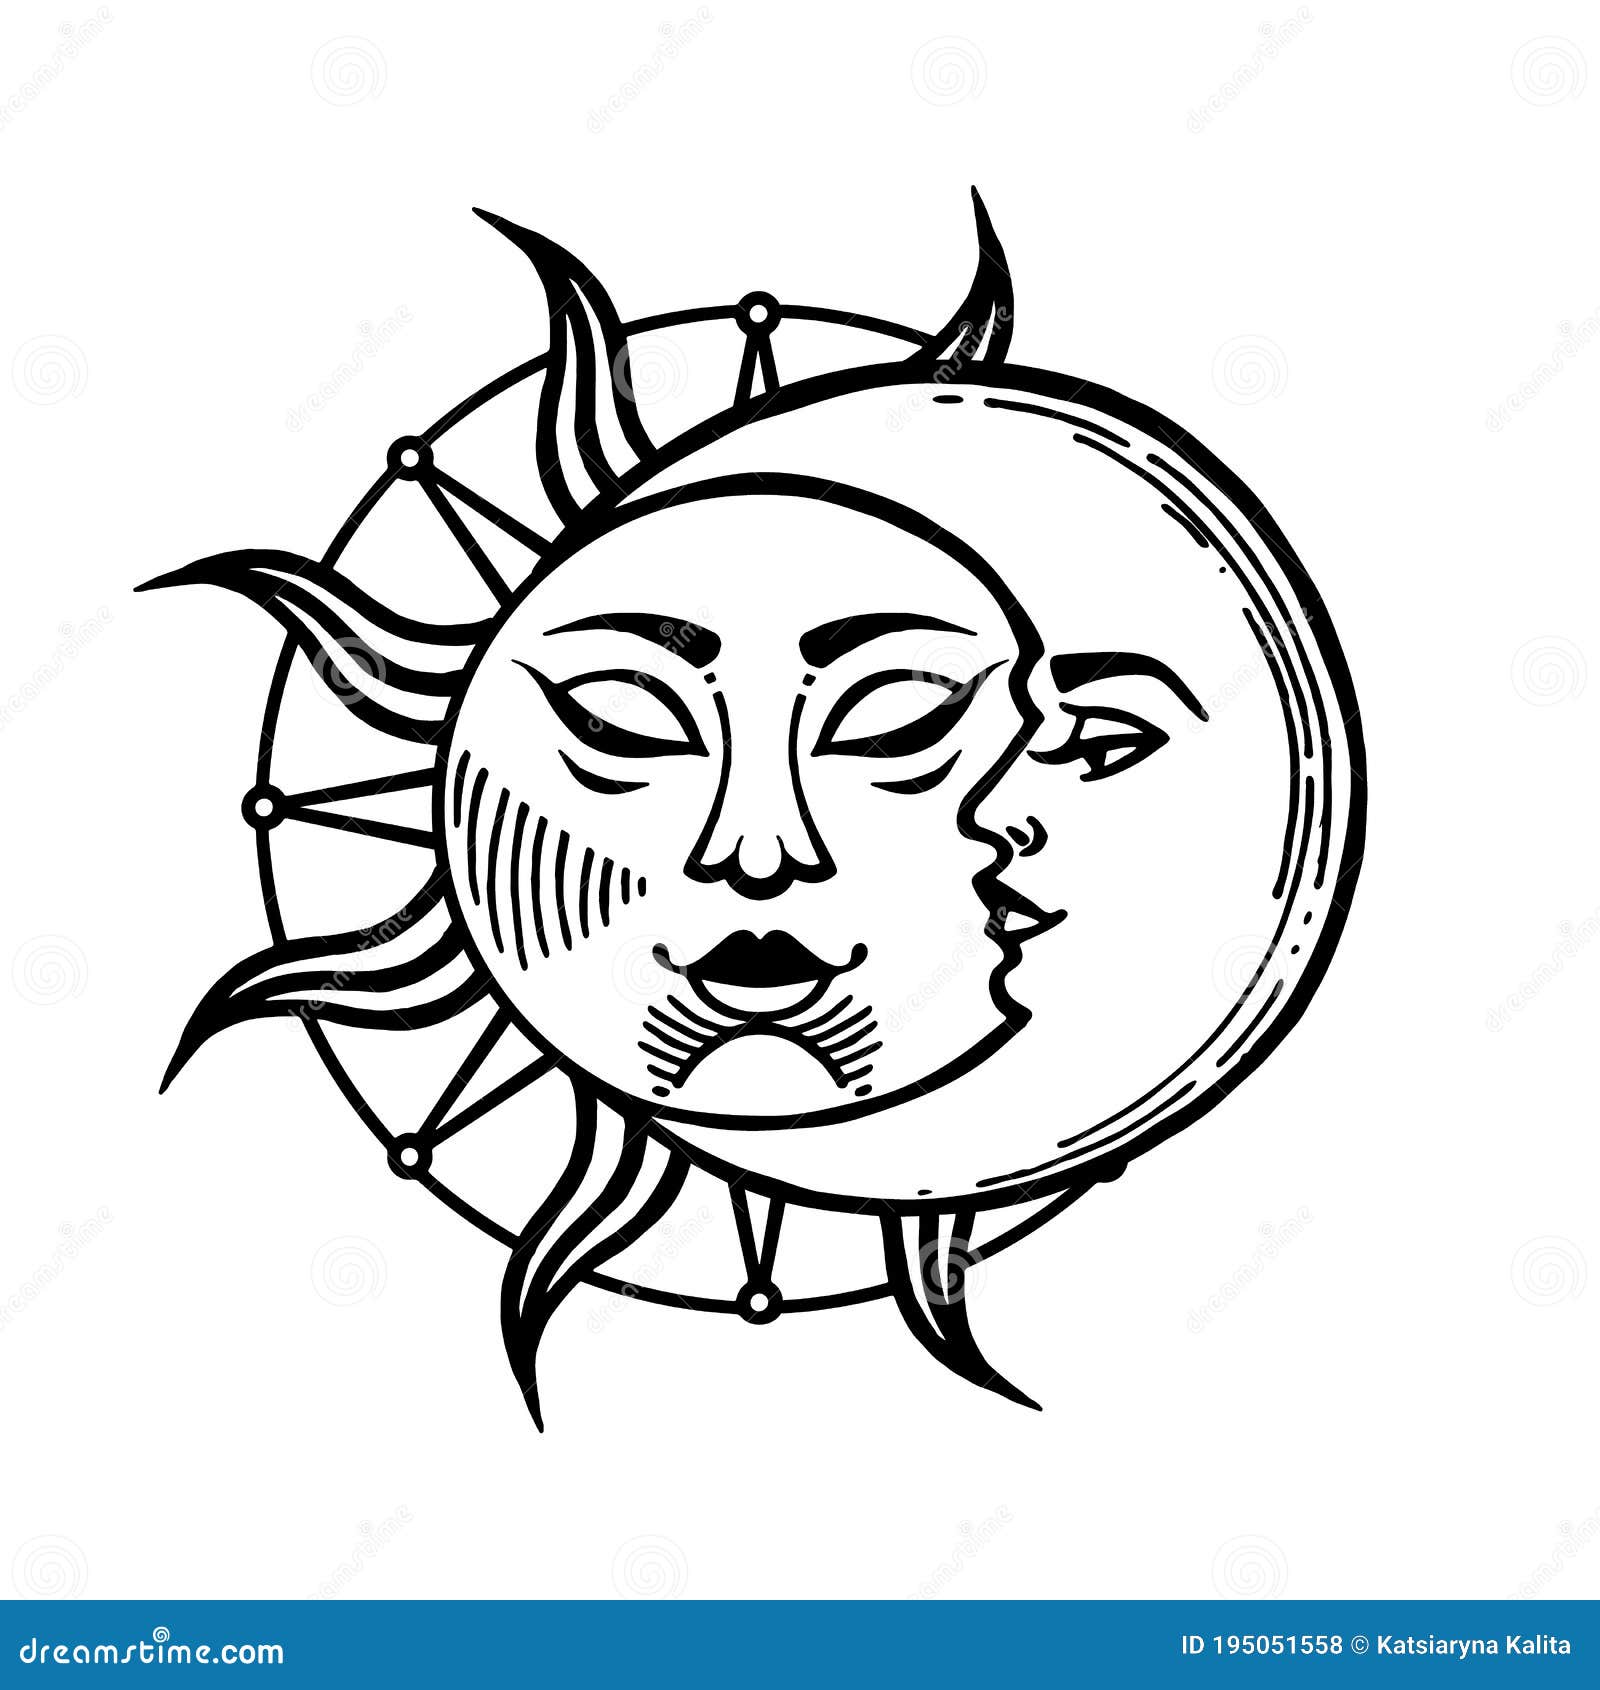 Moon And Sun Tattoo Moon With Face Stylized As Engraving Stock Vector Illustration Of Line Icon